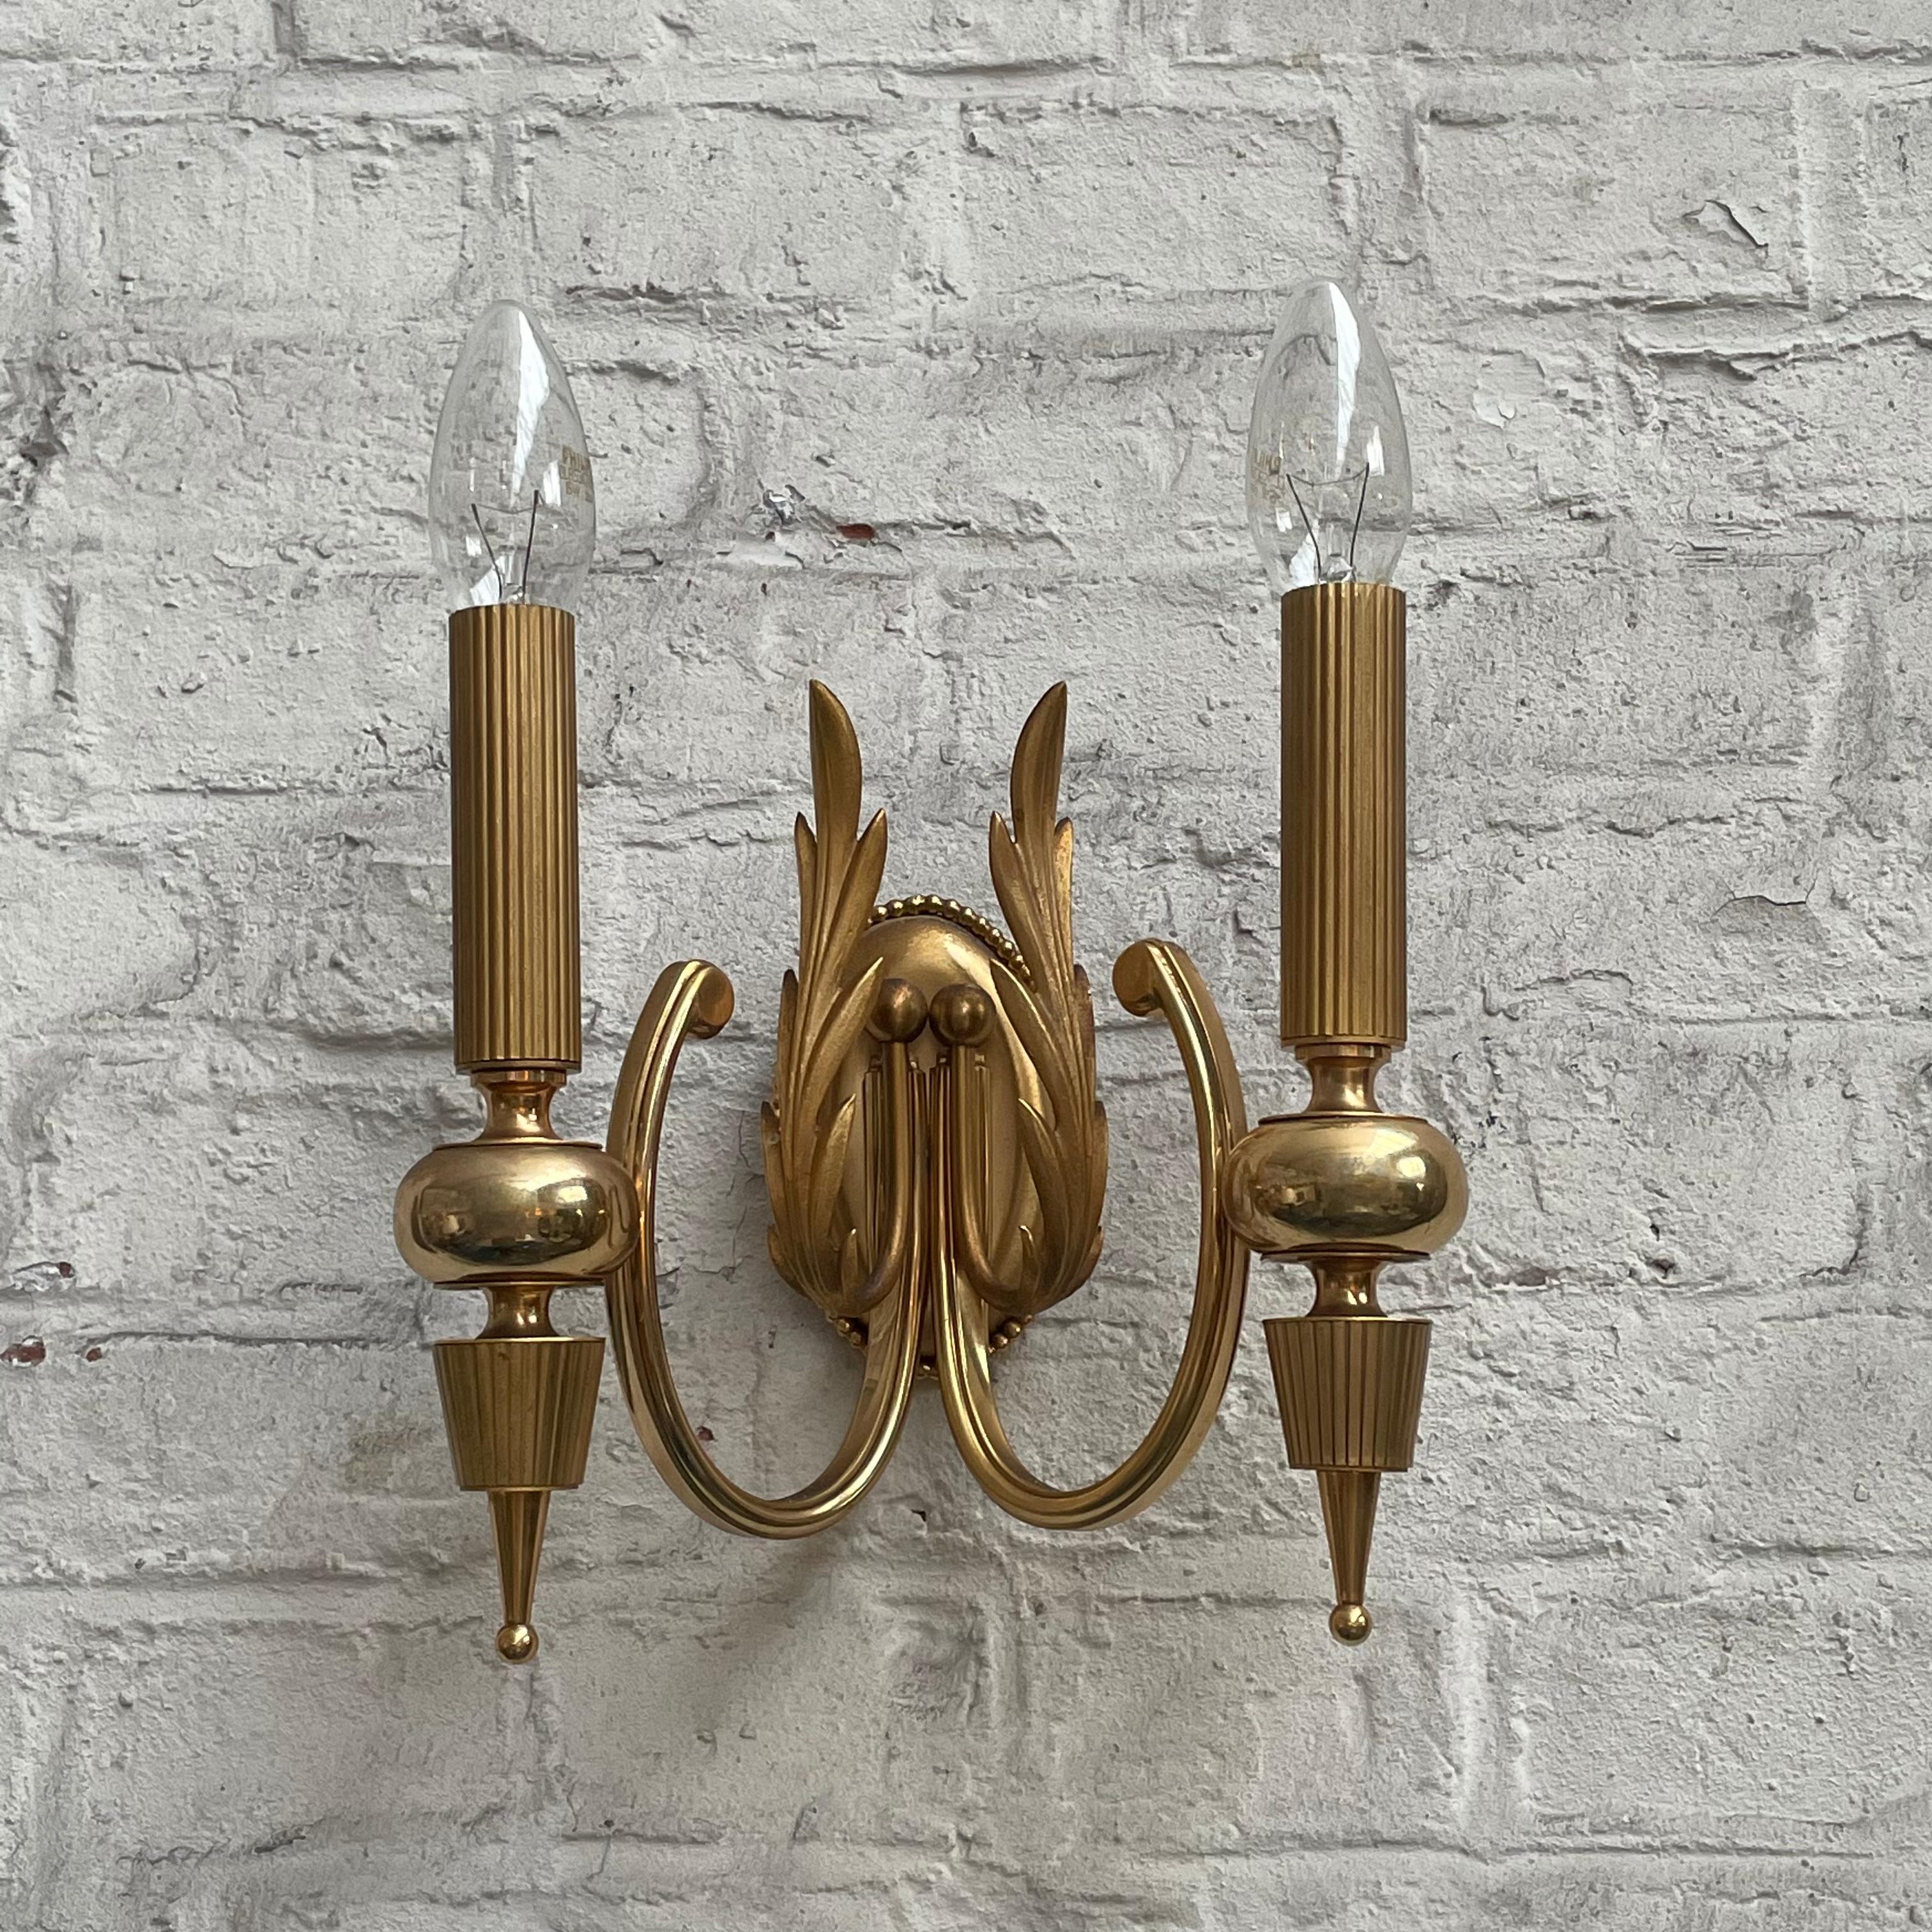 Gaetano Sciolari Sconce in Brass, Roma, Italy, 1950s.

Beautiful neoclassical wall sconce in patinated brass by Gaetano Sciolari (1927-1994) for his company Sciolari in Roma, Italy. A distinct and elegant wall sconce, with two light sources and